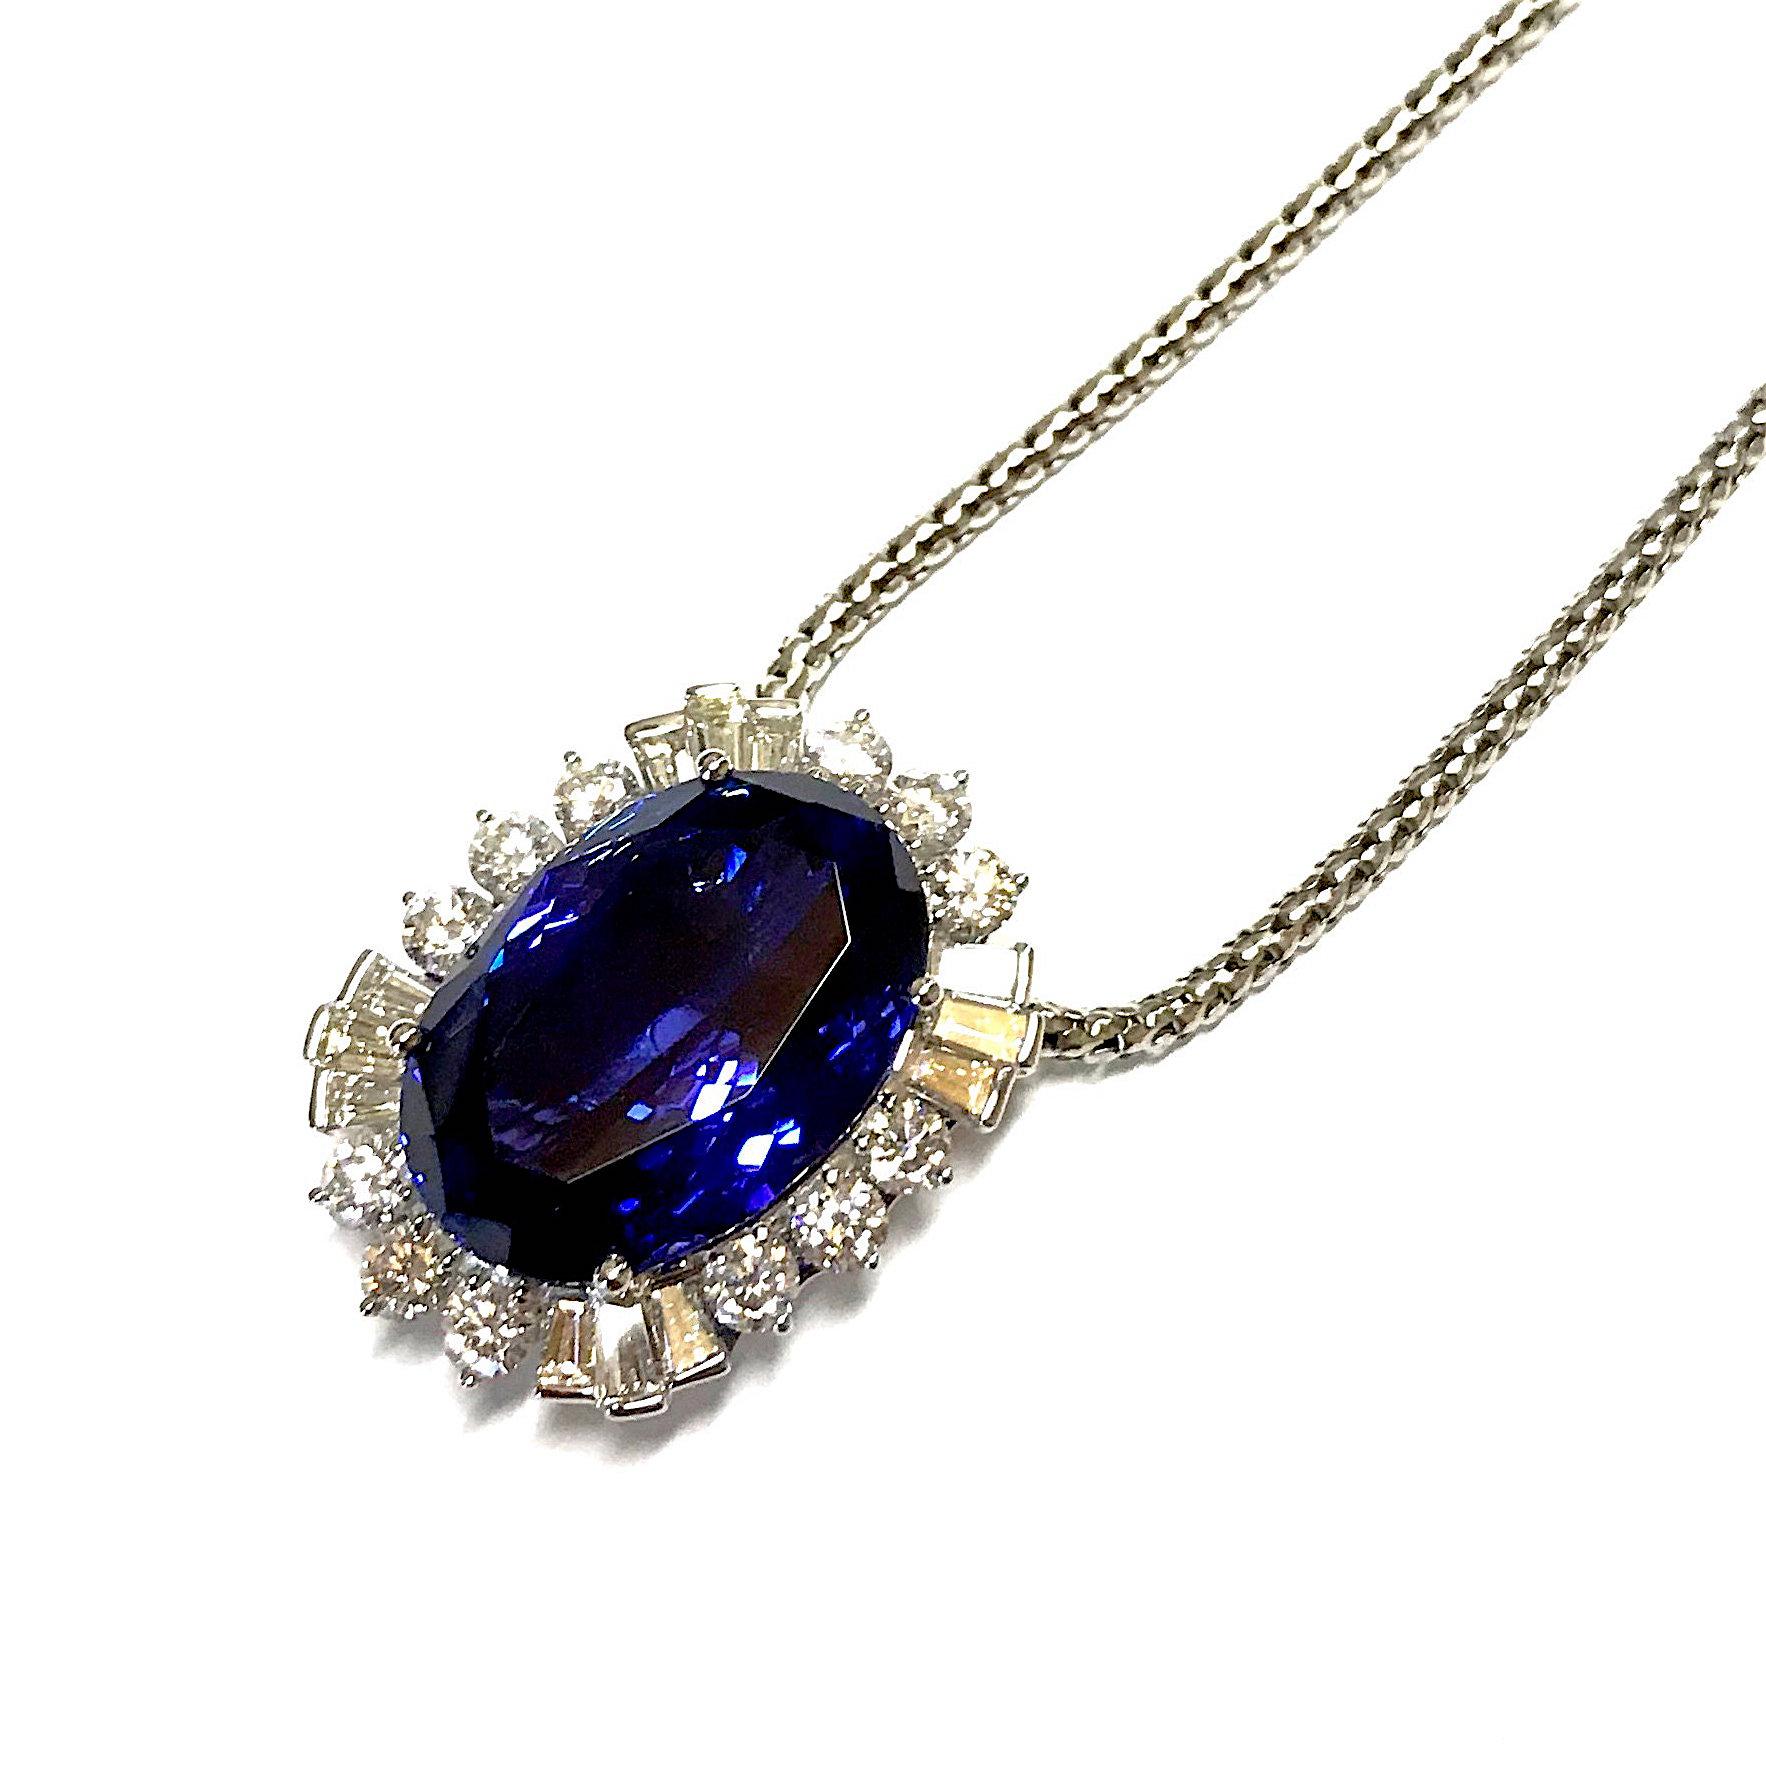 Oval Cut 36.86 Carat Oval Tanzanite and White Diamond and Baguette Necklace